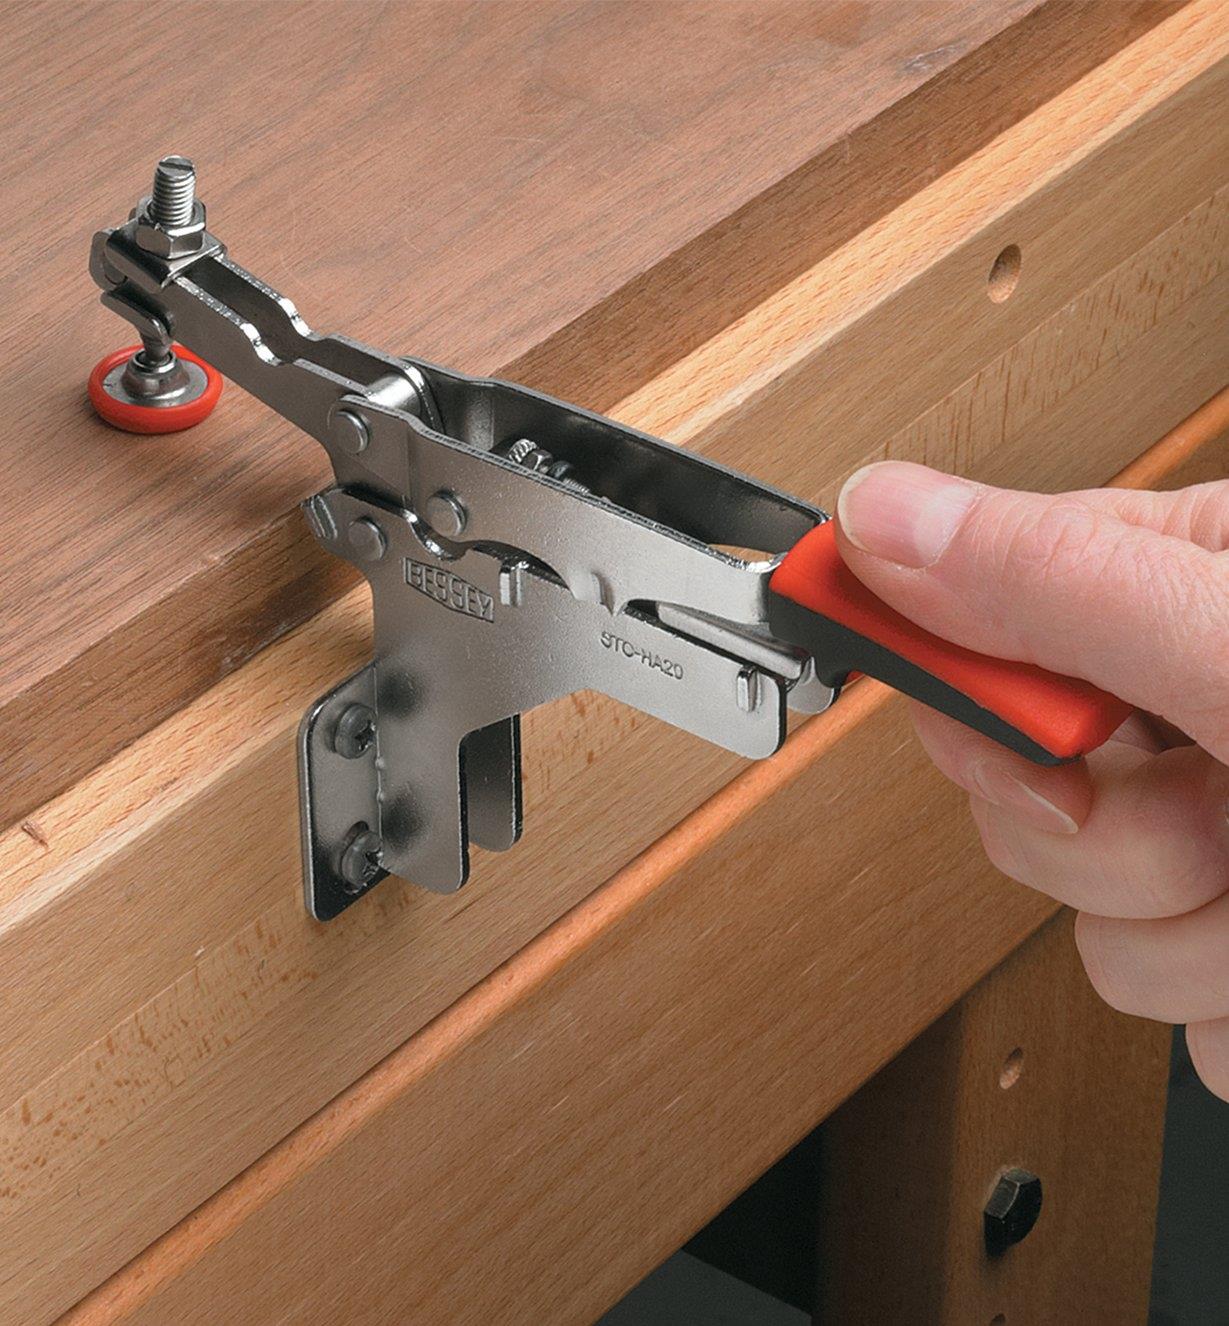 17F7211 - Small Bessey Perpendicular-Mount Horizonal Auto-Adjust Toggle Clamp, each